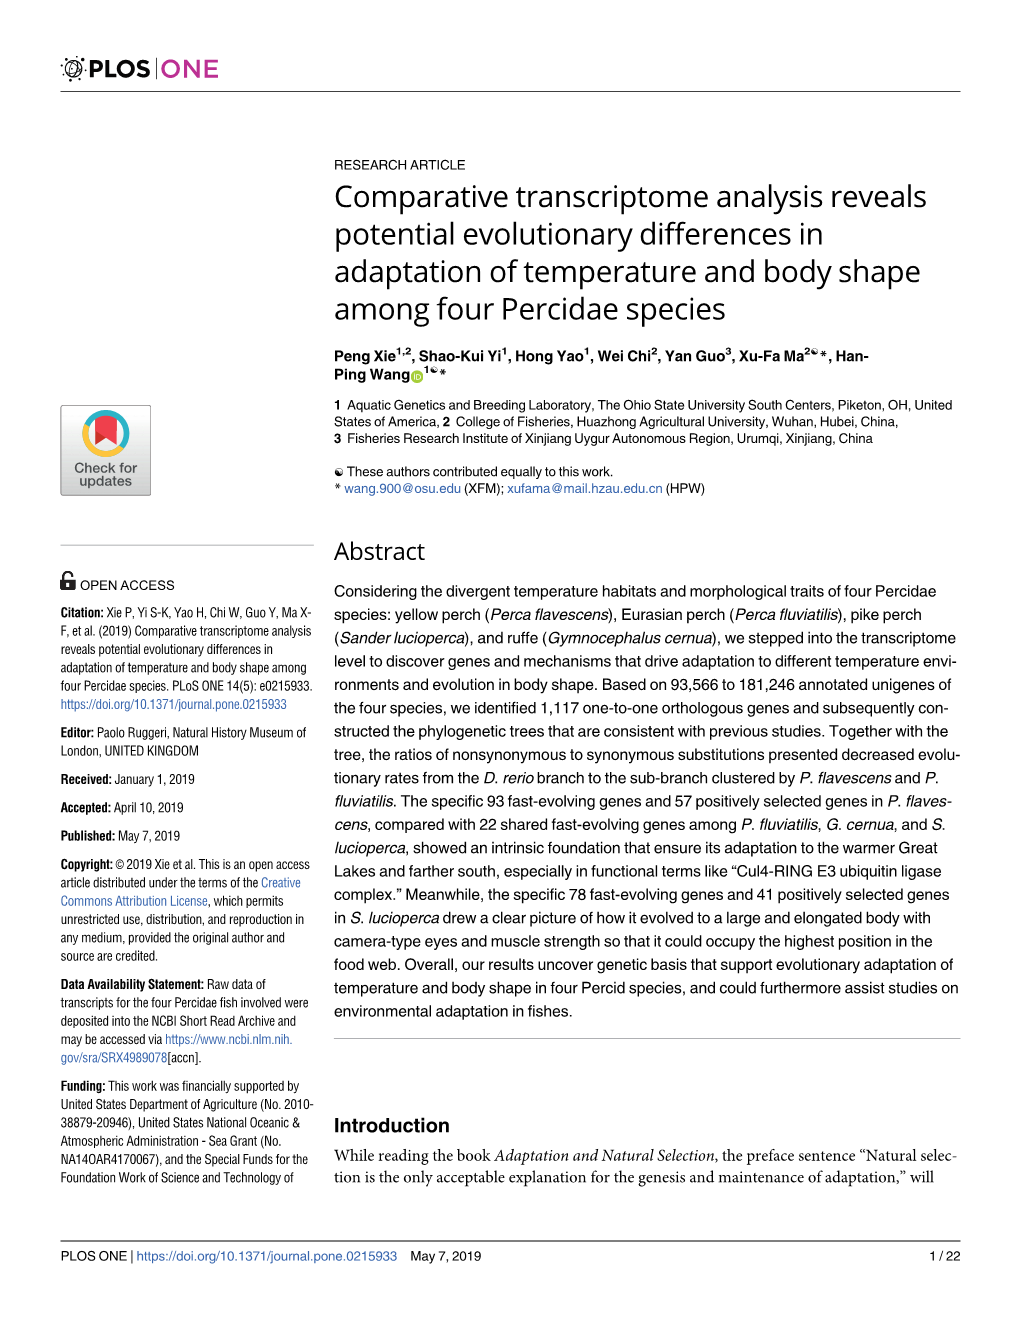 Comparative Transcriptome Analysis Reveals Potential Evolutionary Differences in Adaptation of Temperature and Body Shape Among Four Percidae Species